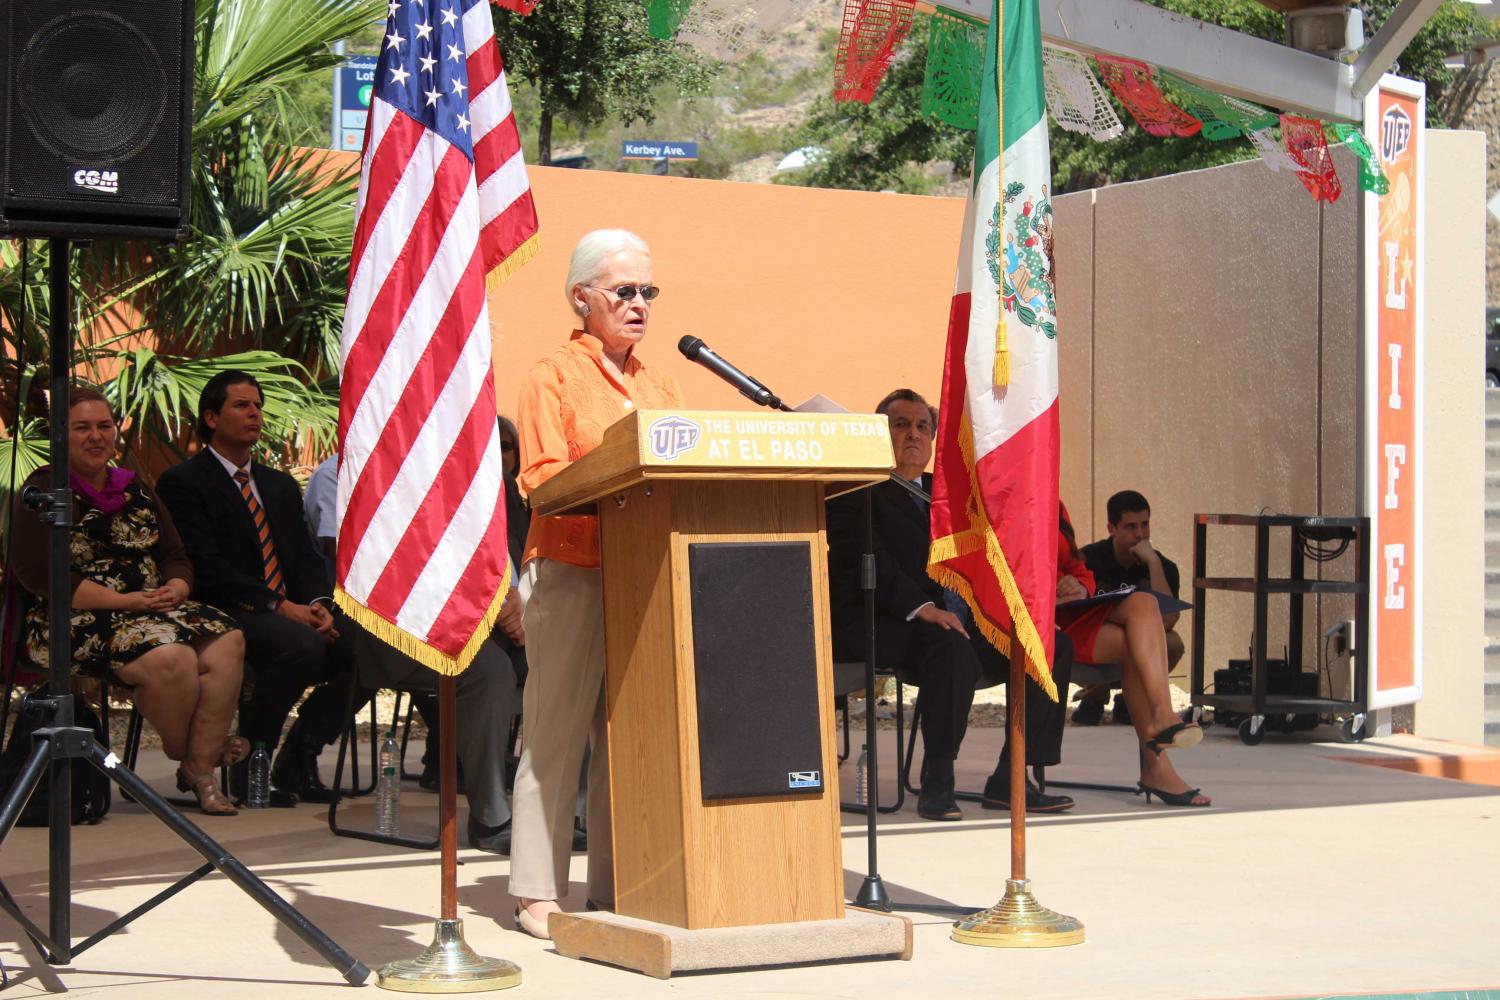 UTEP+holds+annual+El+Grito+ceremony